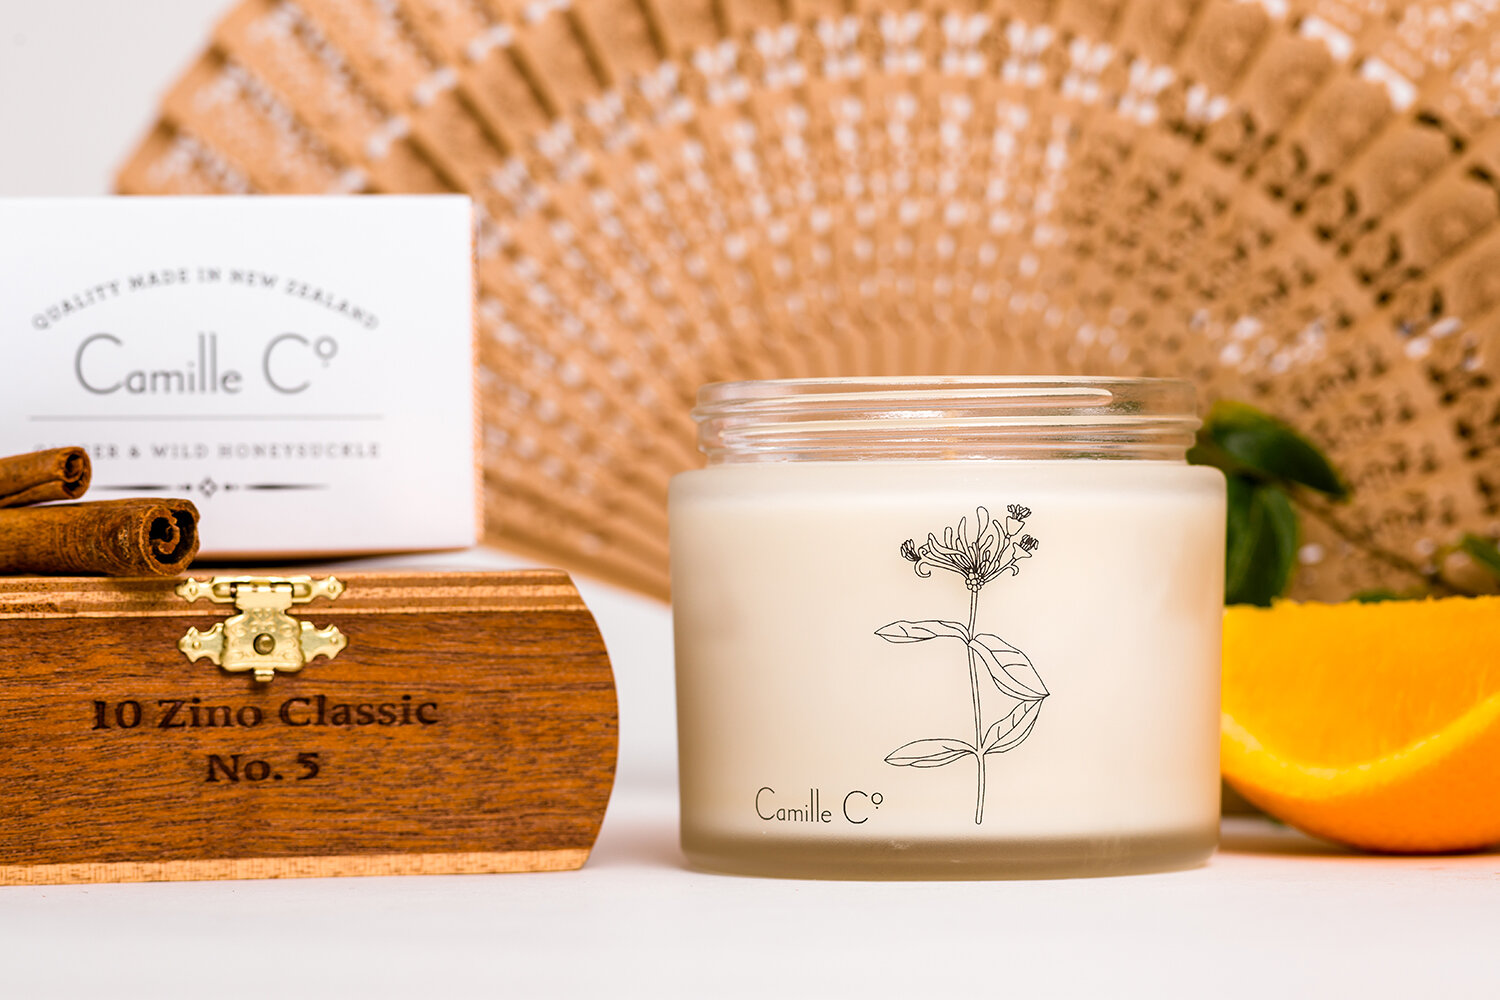 Camille Co. Ginger and Wild Honeysuckle Candle